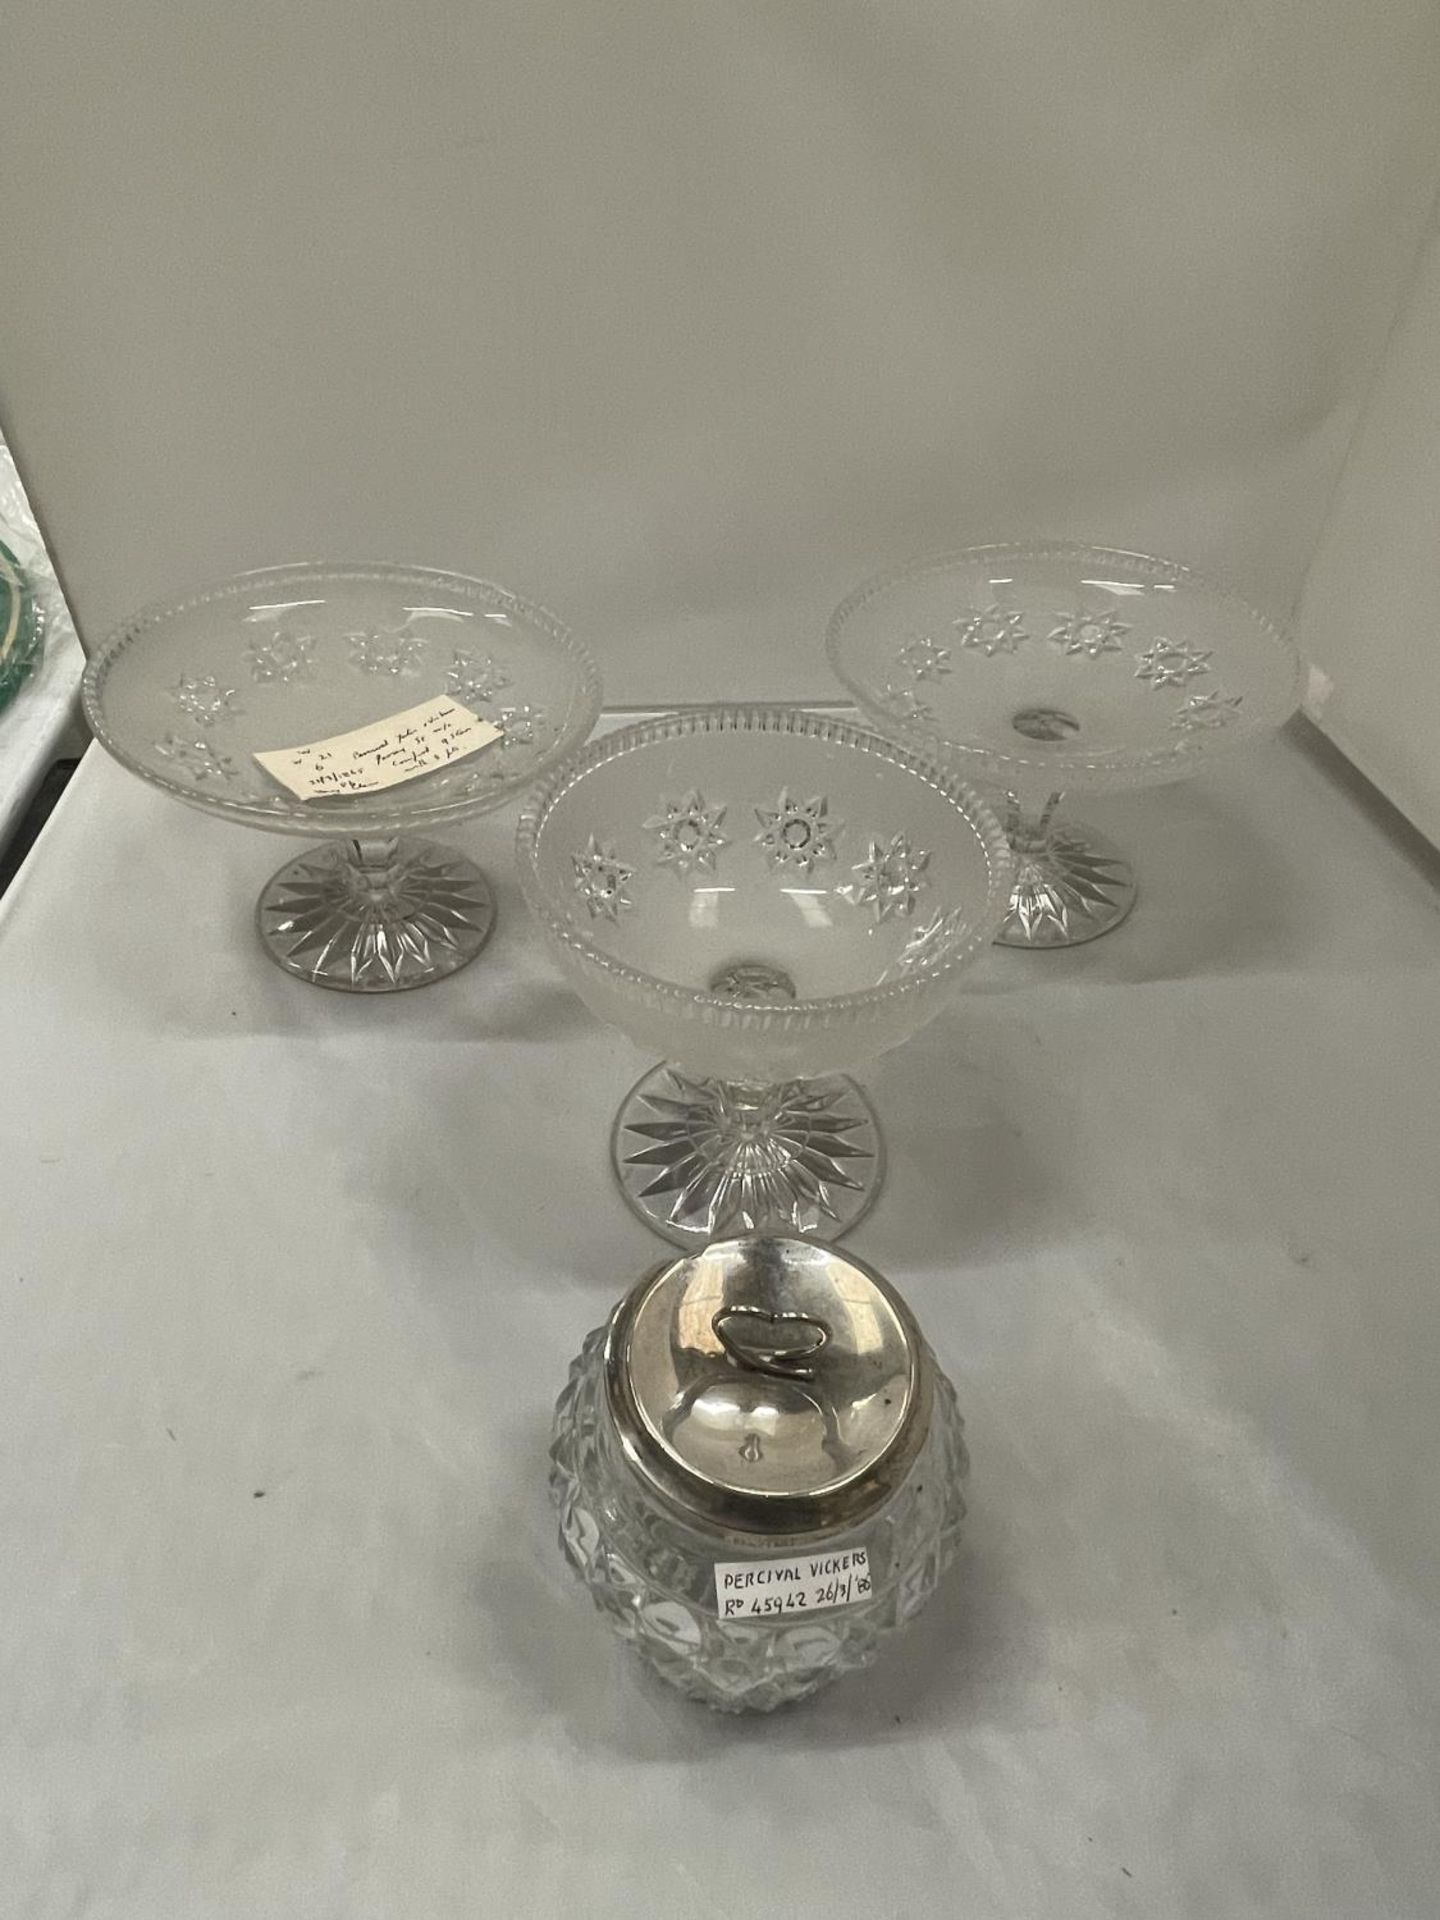 FOUR ITEMS OF PERCIVAL VICKERS GLASSWARE TO INCLUDE A HALLMARKED BIRMINGHAM SILVER LIDDED POT AND